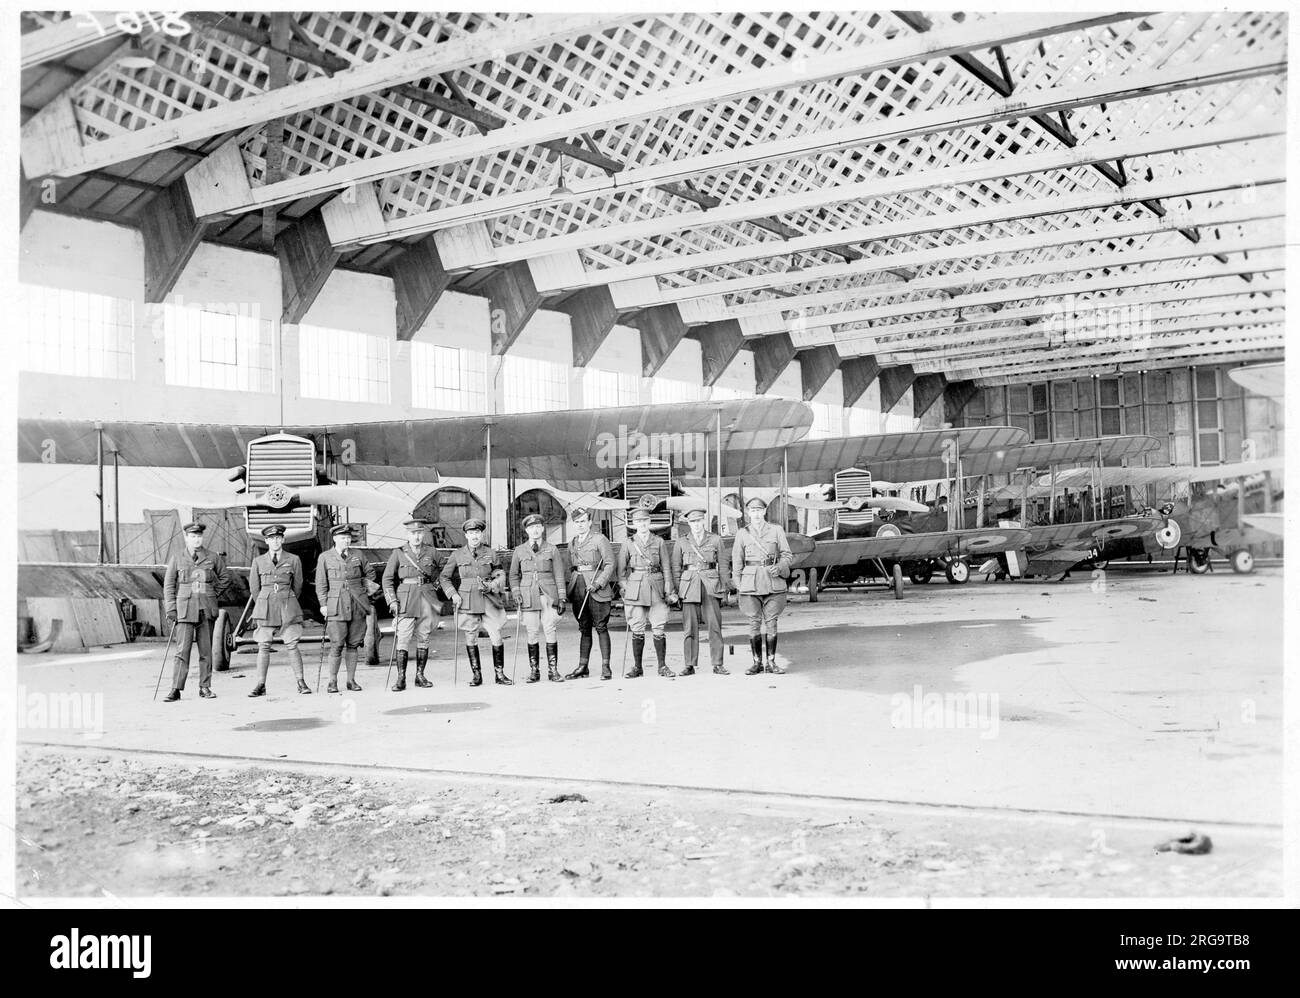 Canadian Air Force - The assembled men and machines of No. 2 Squadron Canadian Air Force (1918-1920), probably at Shoreham aerodrome (or, less likely, Upper Heyford). The Canadian Air Force (CAF) was a contingent of two Canadian air force squadrons - one fighter and one bomber - authorized by the British Air Ministry in August 1918 during the close of the First World War. The unit was independent from the Canadian Expeditionary Force and the Royal Air Force (RAF). No.2 Squadron of the Canadian Air Force was equipped with Airco DH.9A day bombers and was active throughout the short life of the C Stock Photo